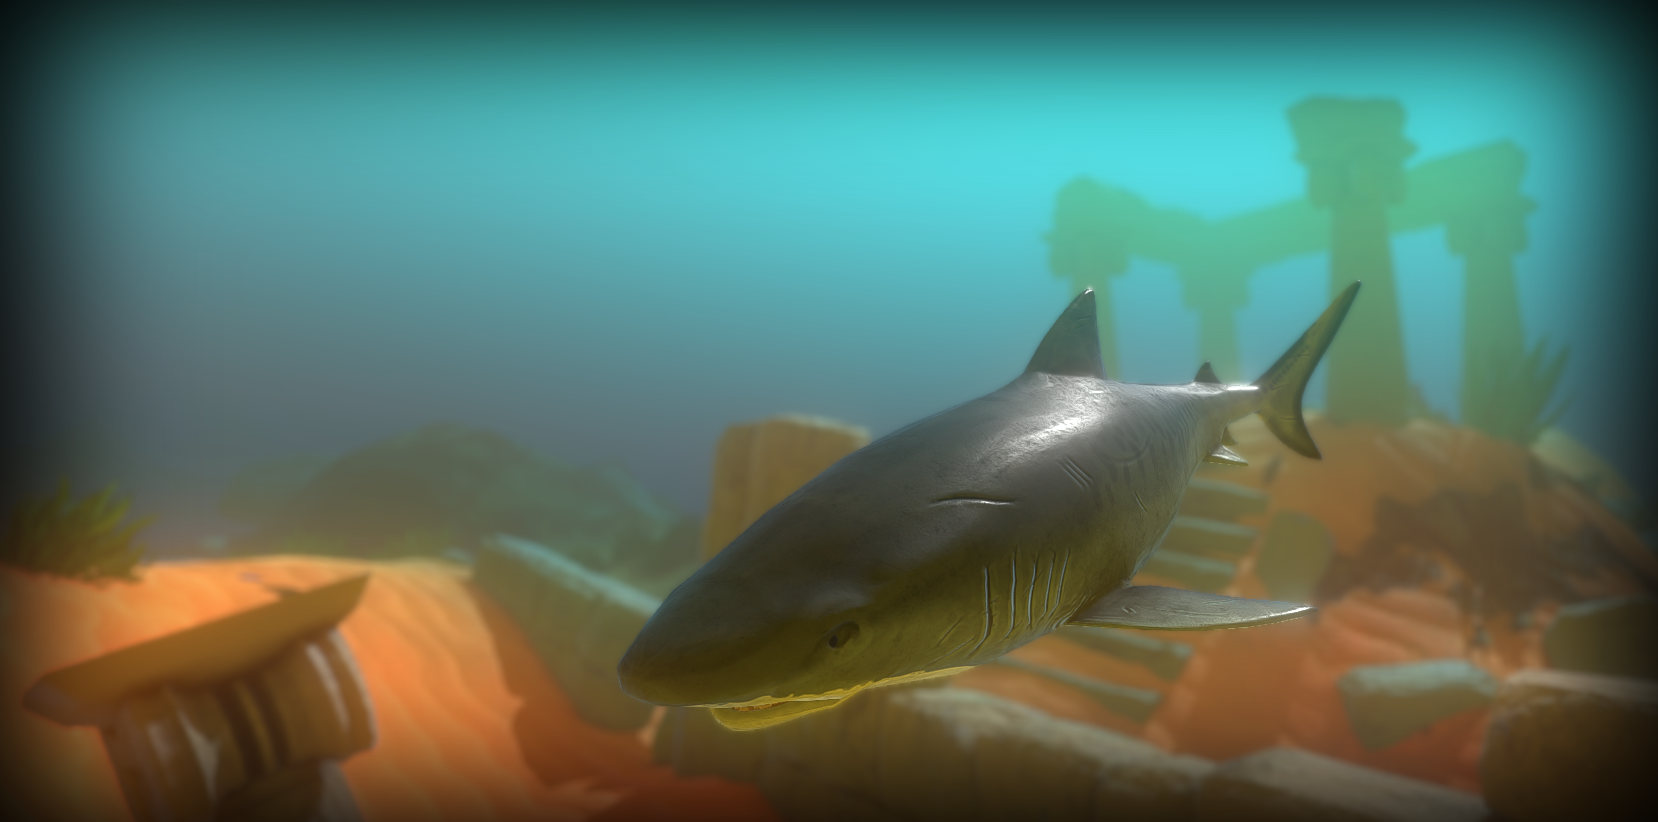 feed and grow fish mod download pc